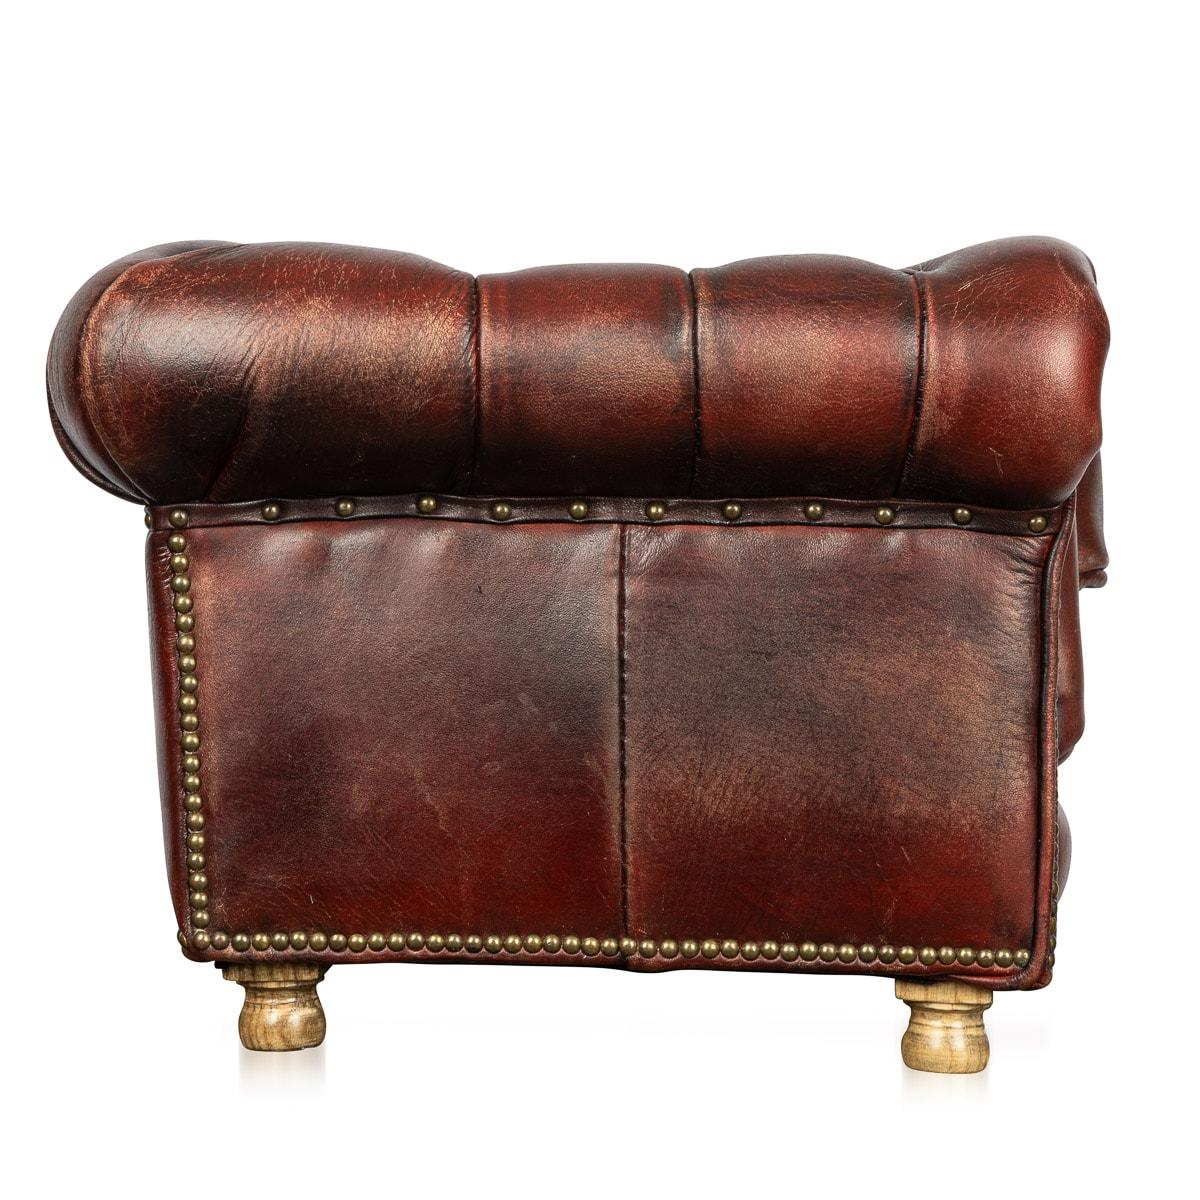 20th Century English Chesterfield Miniature Leather Sofa With Cushion Seats For Sale 2